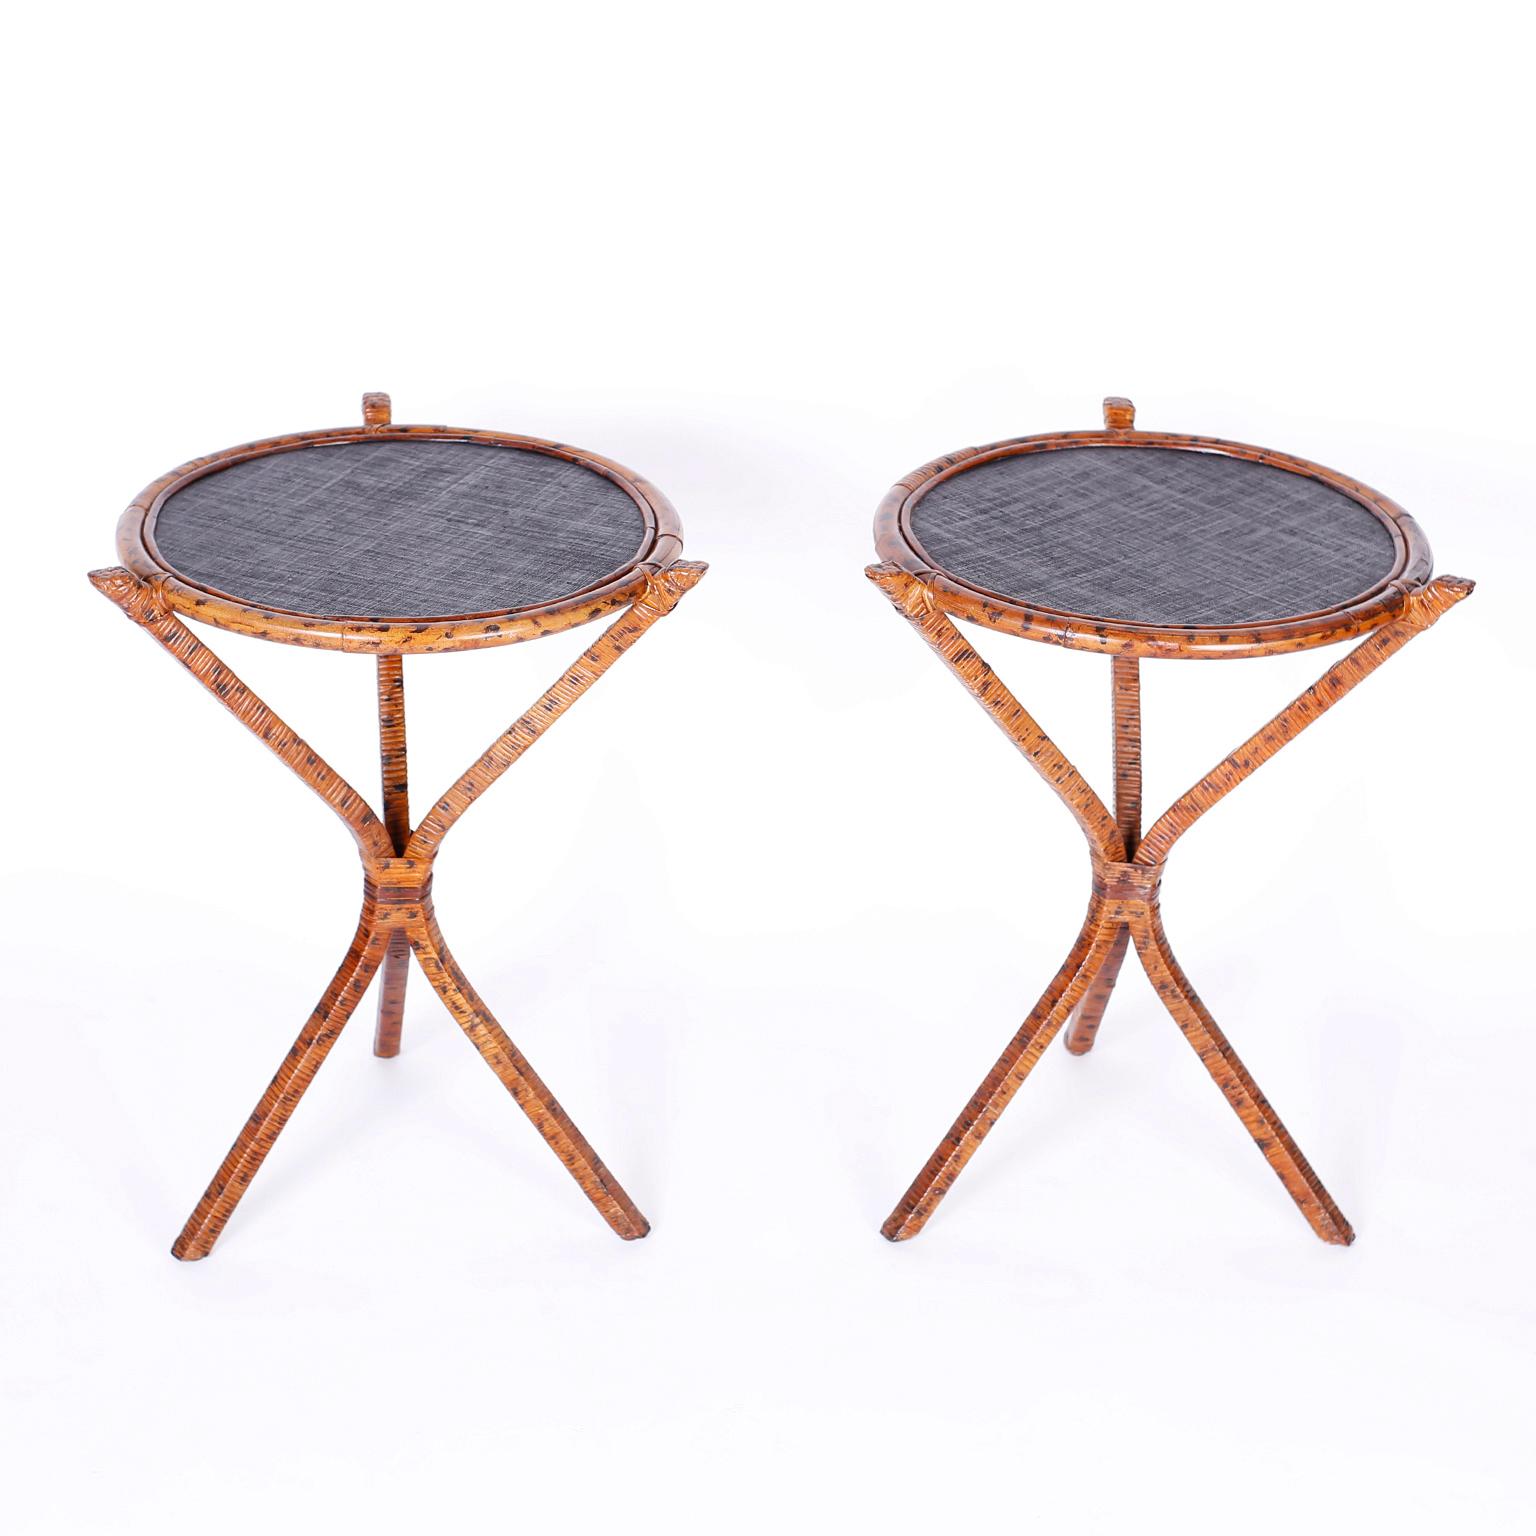 Pair of British colonial style tables with round black grasscloth tops framed with burnt bamboo on three legged metal bases wrapped in reed and decorated in faux burnt bamboo.